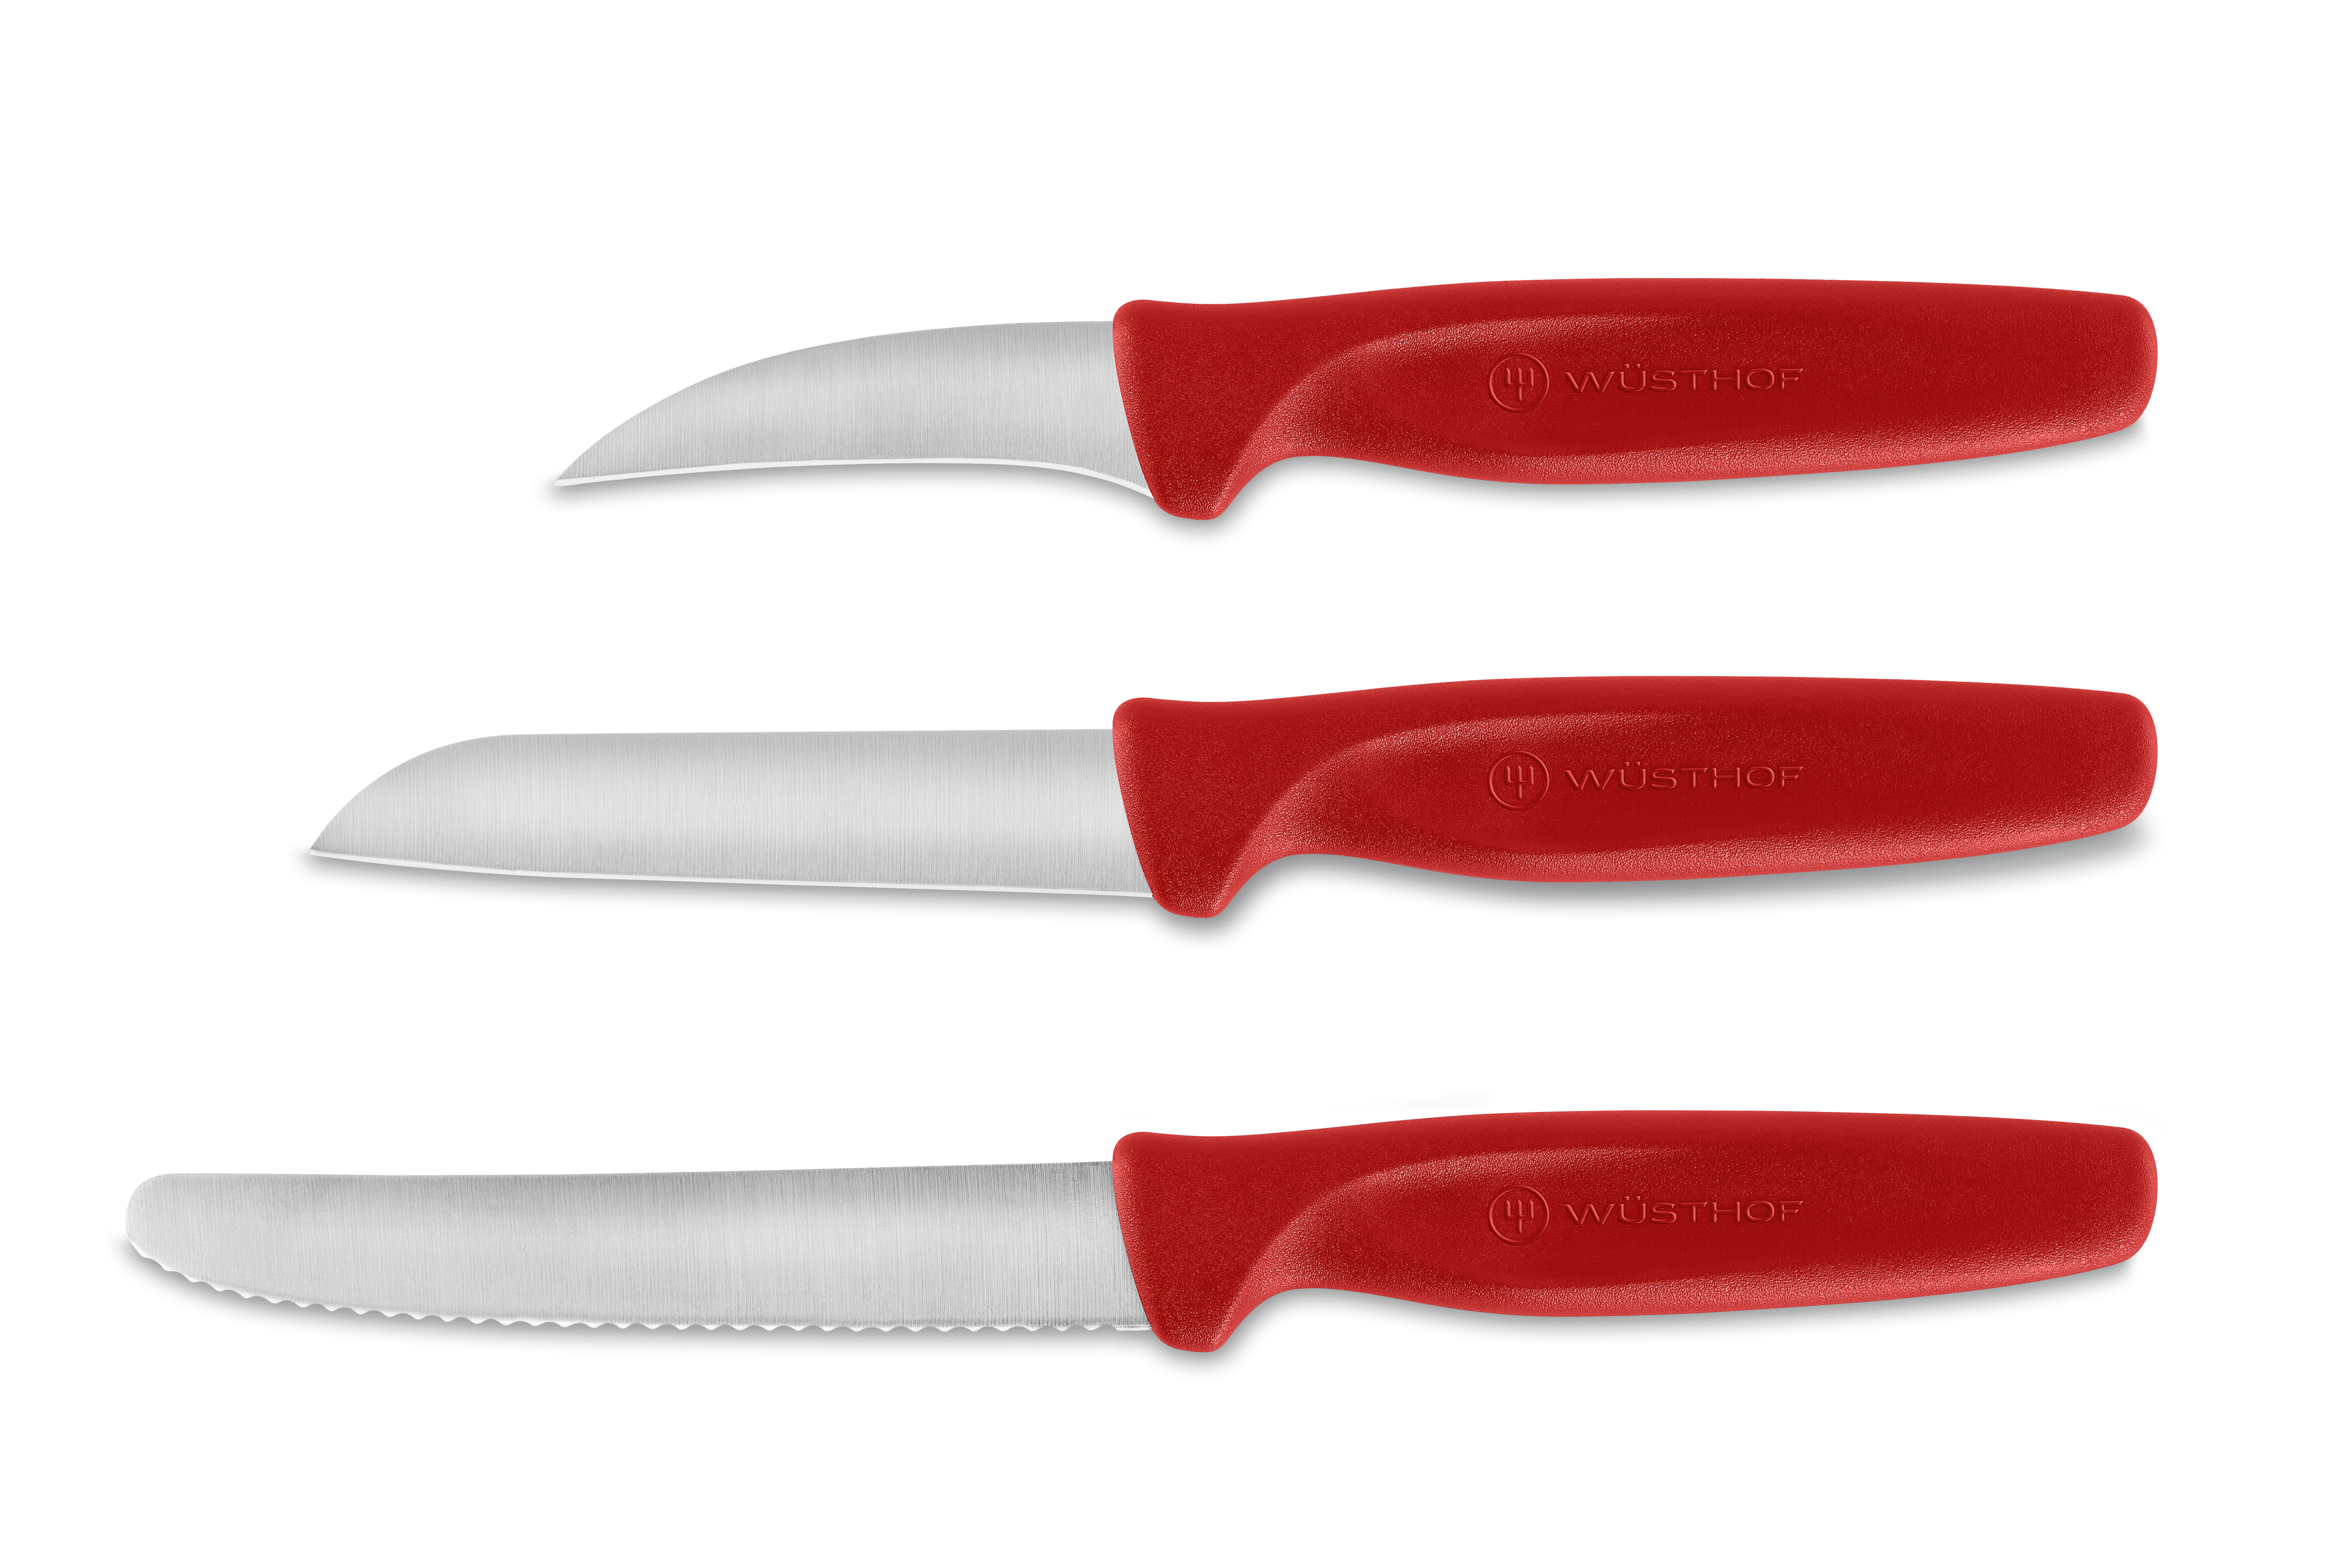 3 Pieces Essential Knife Set with Paring, Chef, and Shears